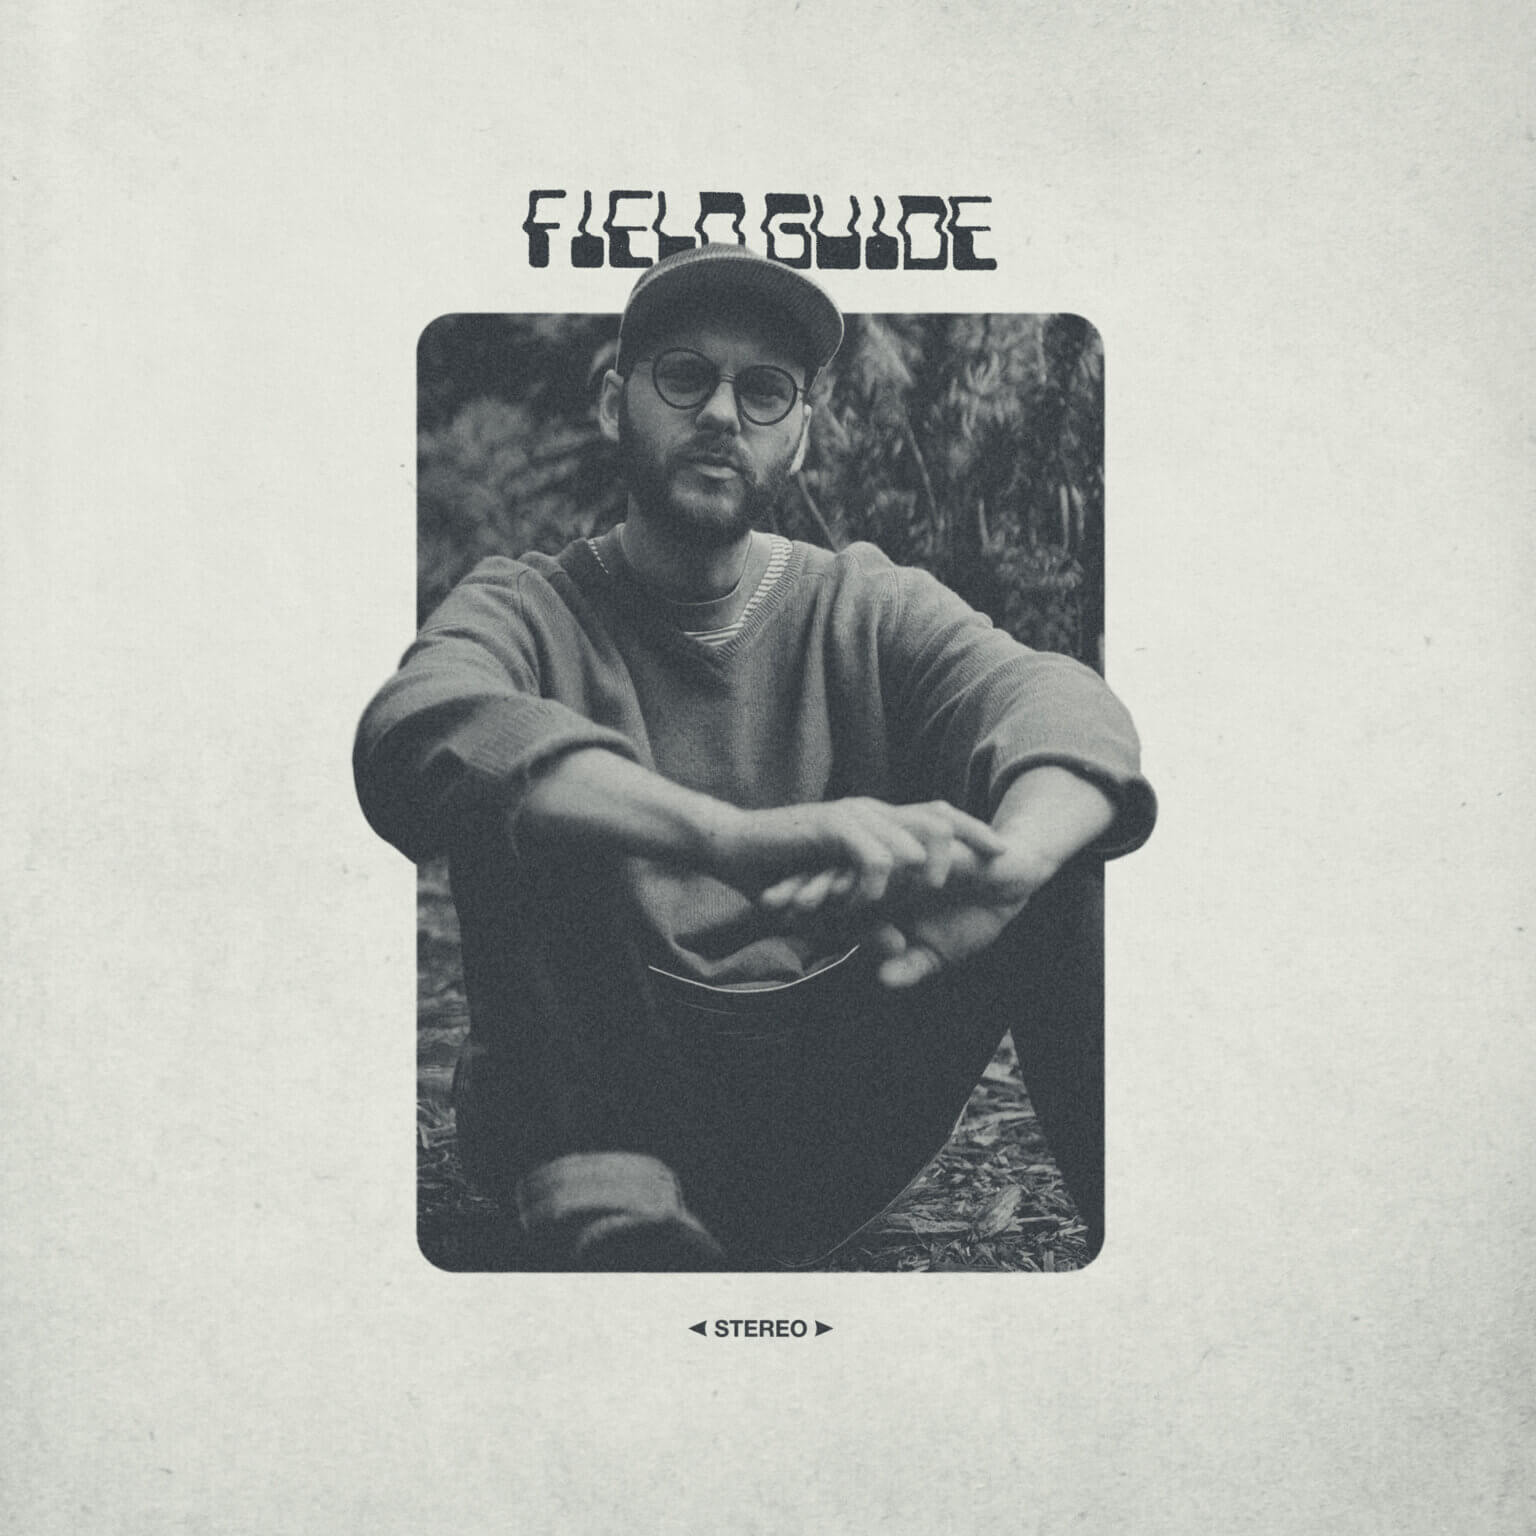 Field Guide, the project of Dylan MacDonald, will release his self-titled album, on October 28th via Birthday Cake Records